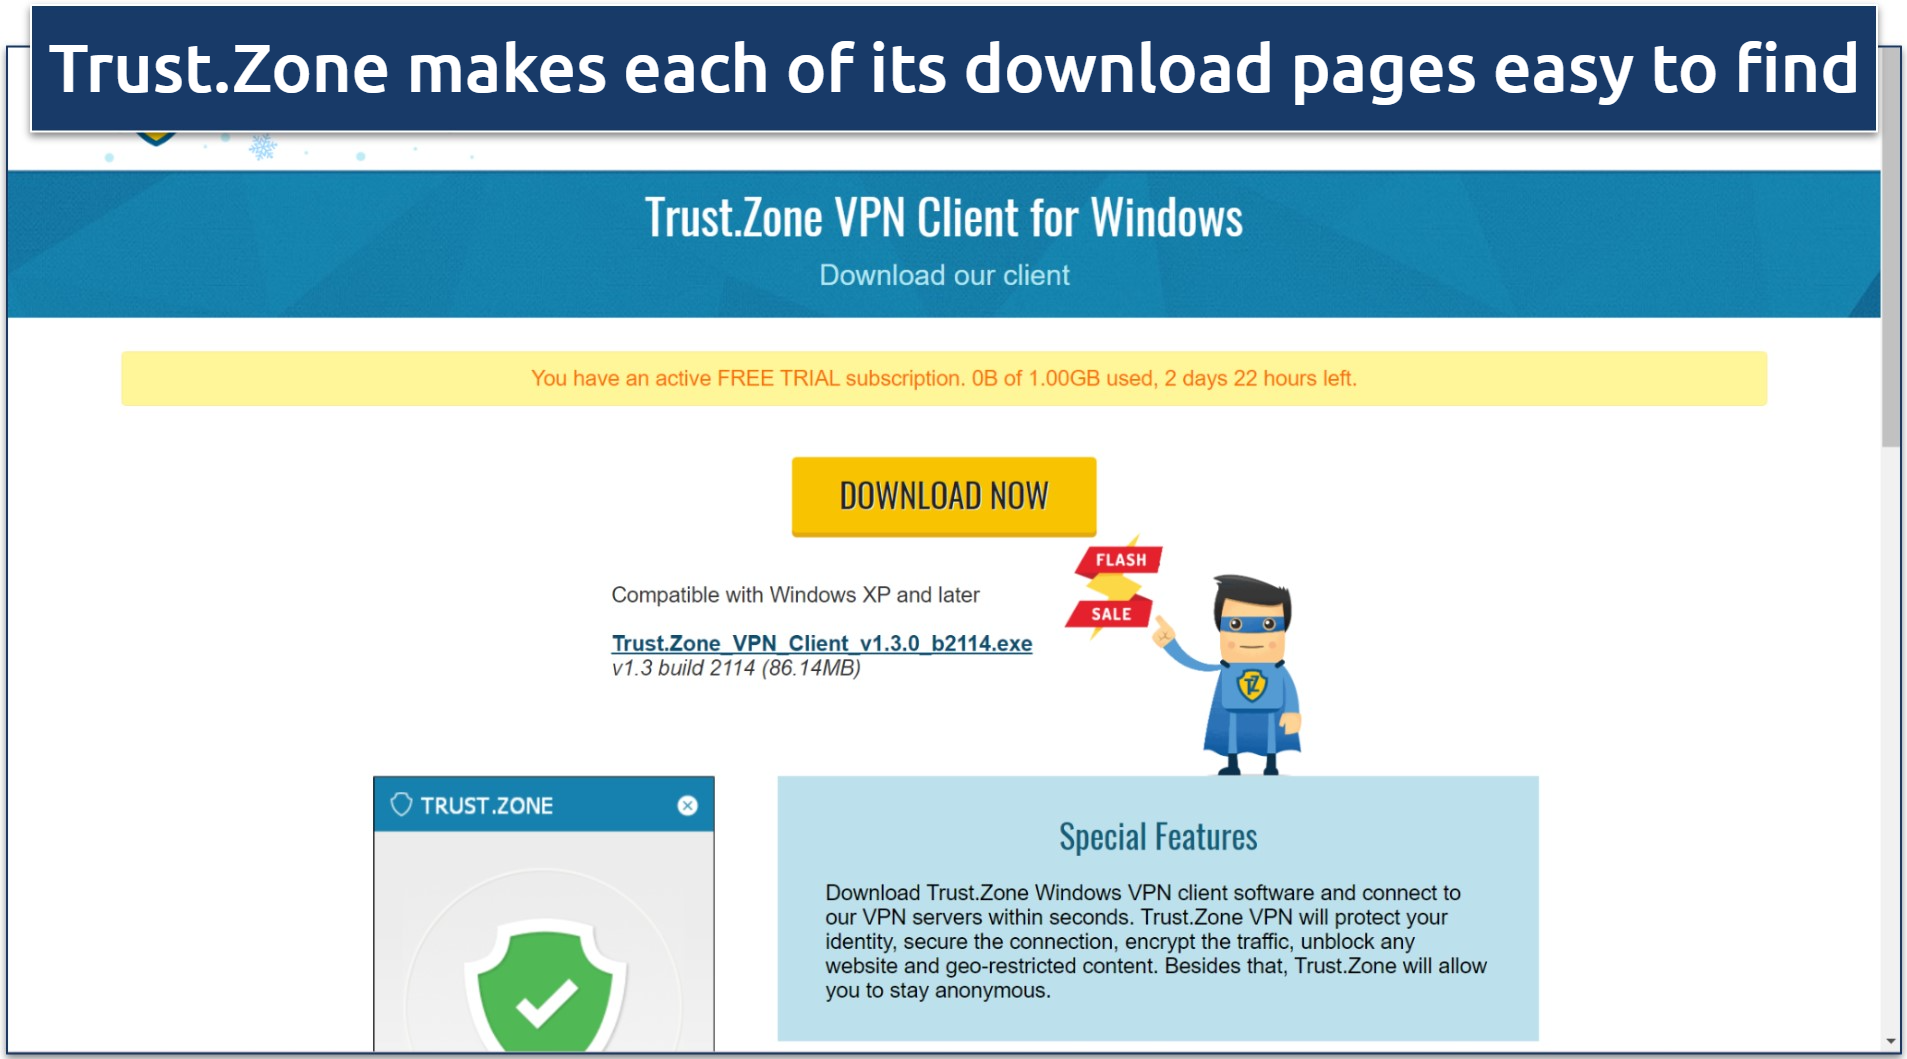 Screenshot of the Trust.Zone's download page for the Windows .exe file 